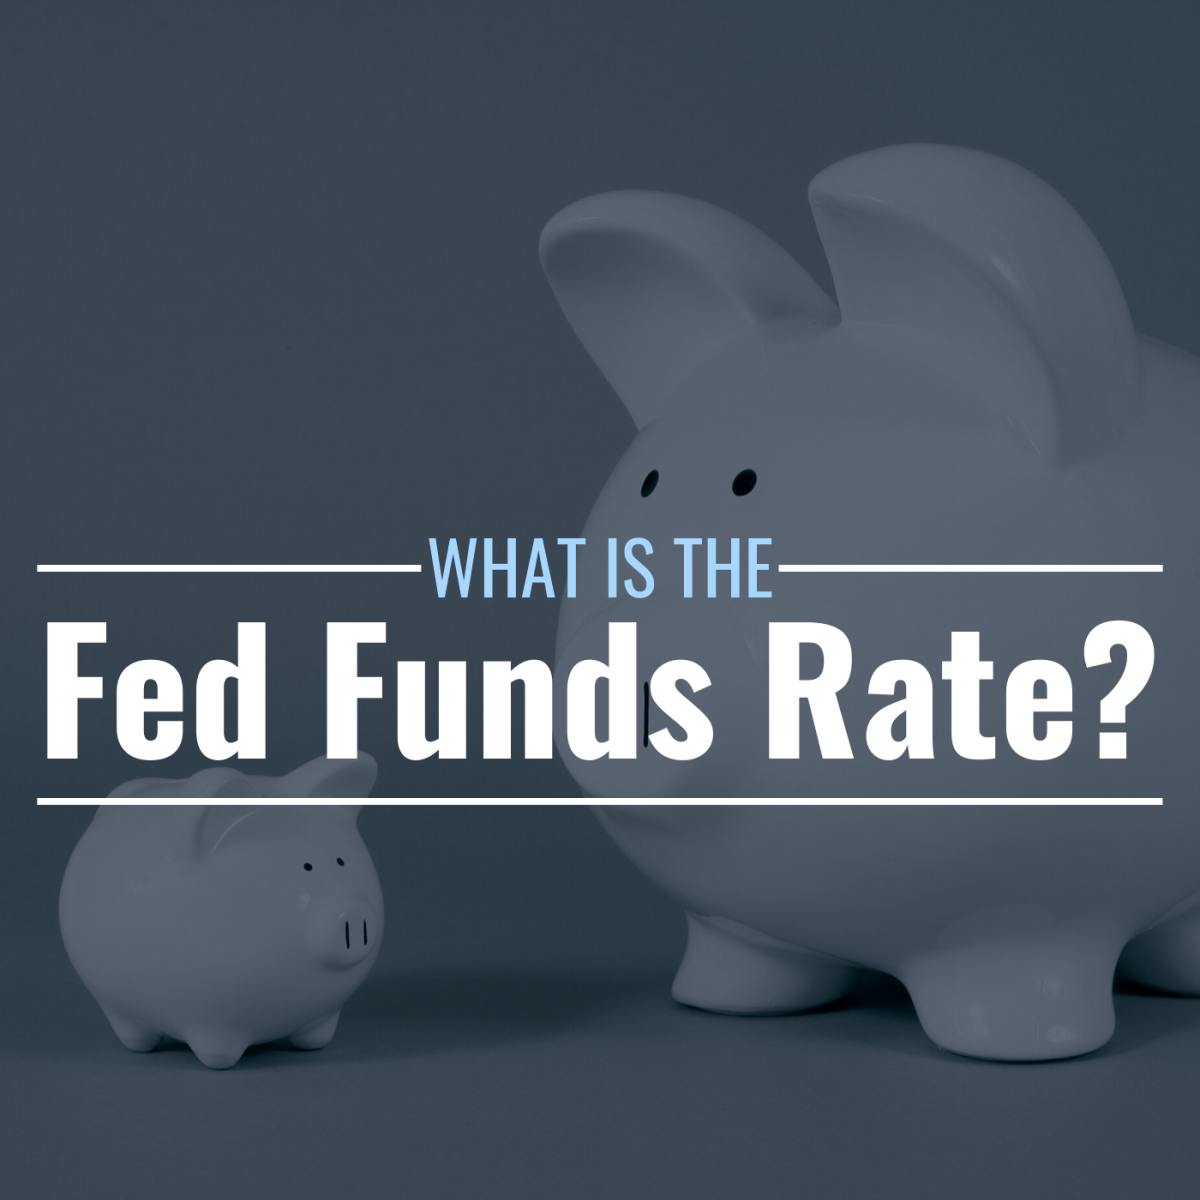 Image of a large piggy bank looking at a small piggy bank with text overlay: "What Is the Fed Funds Rate?"